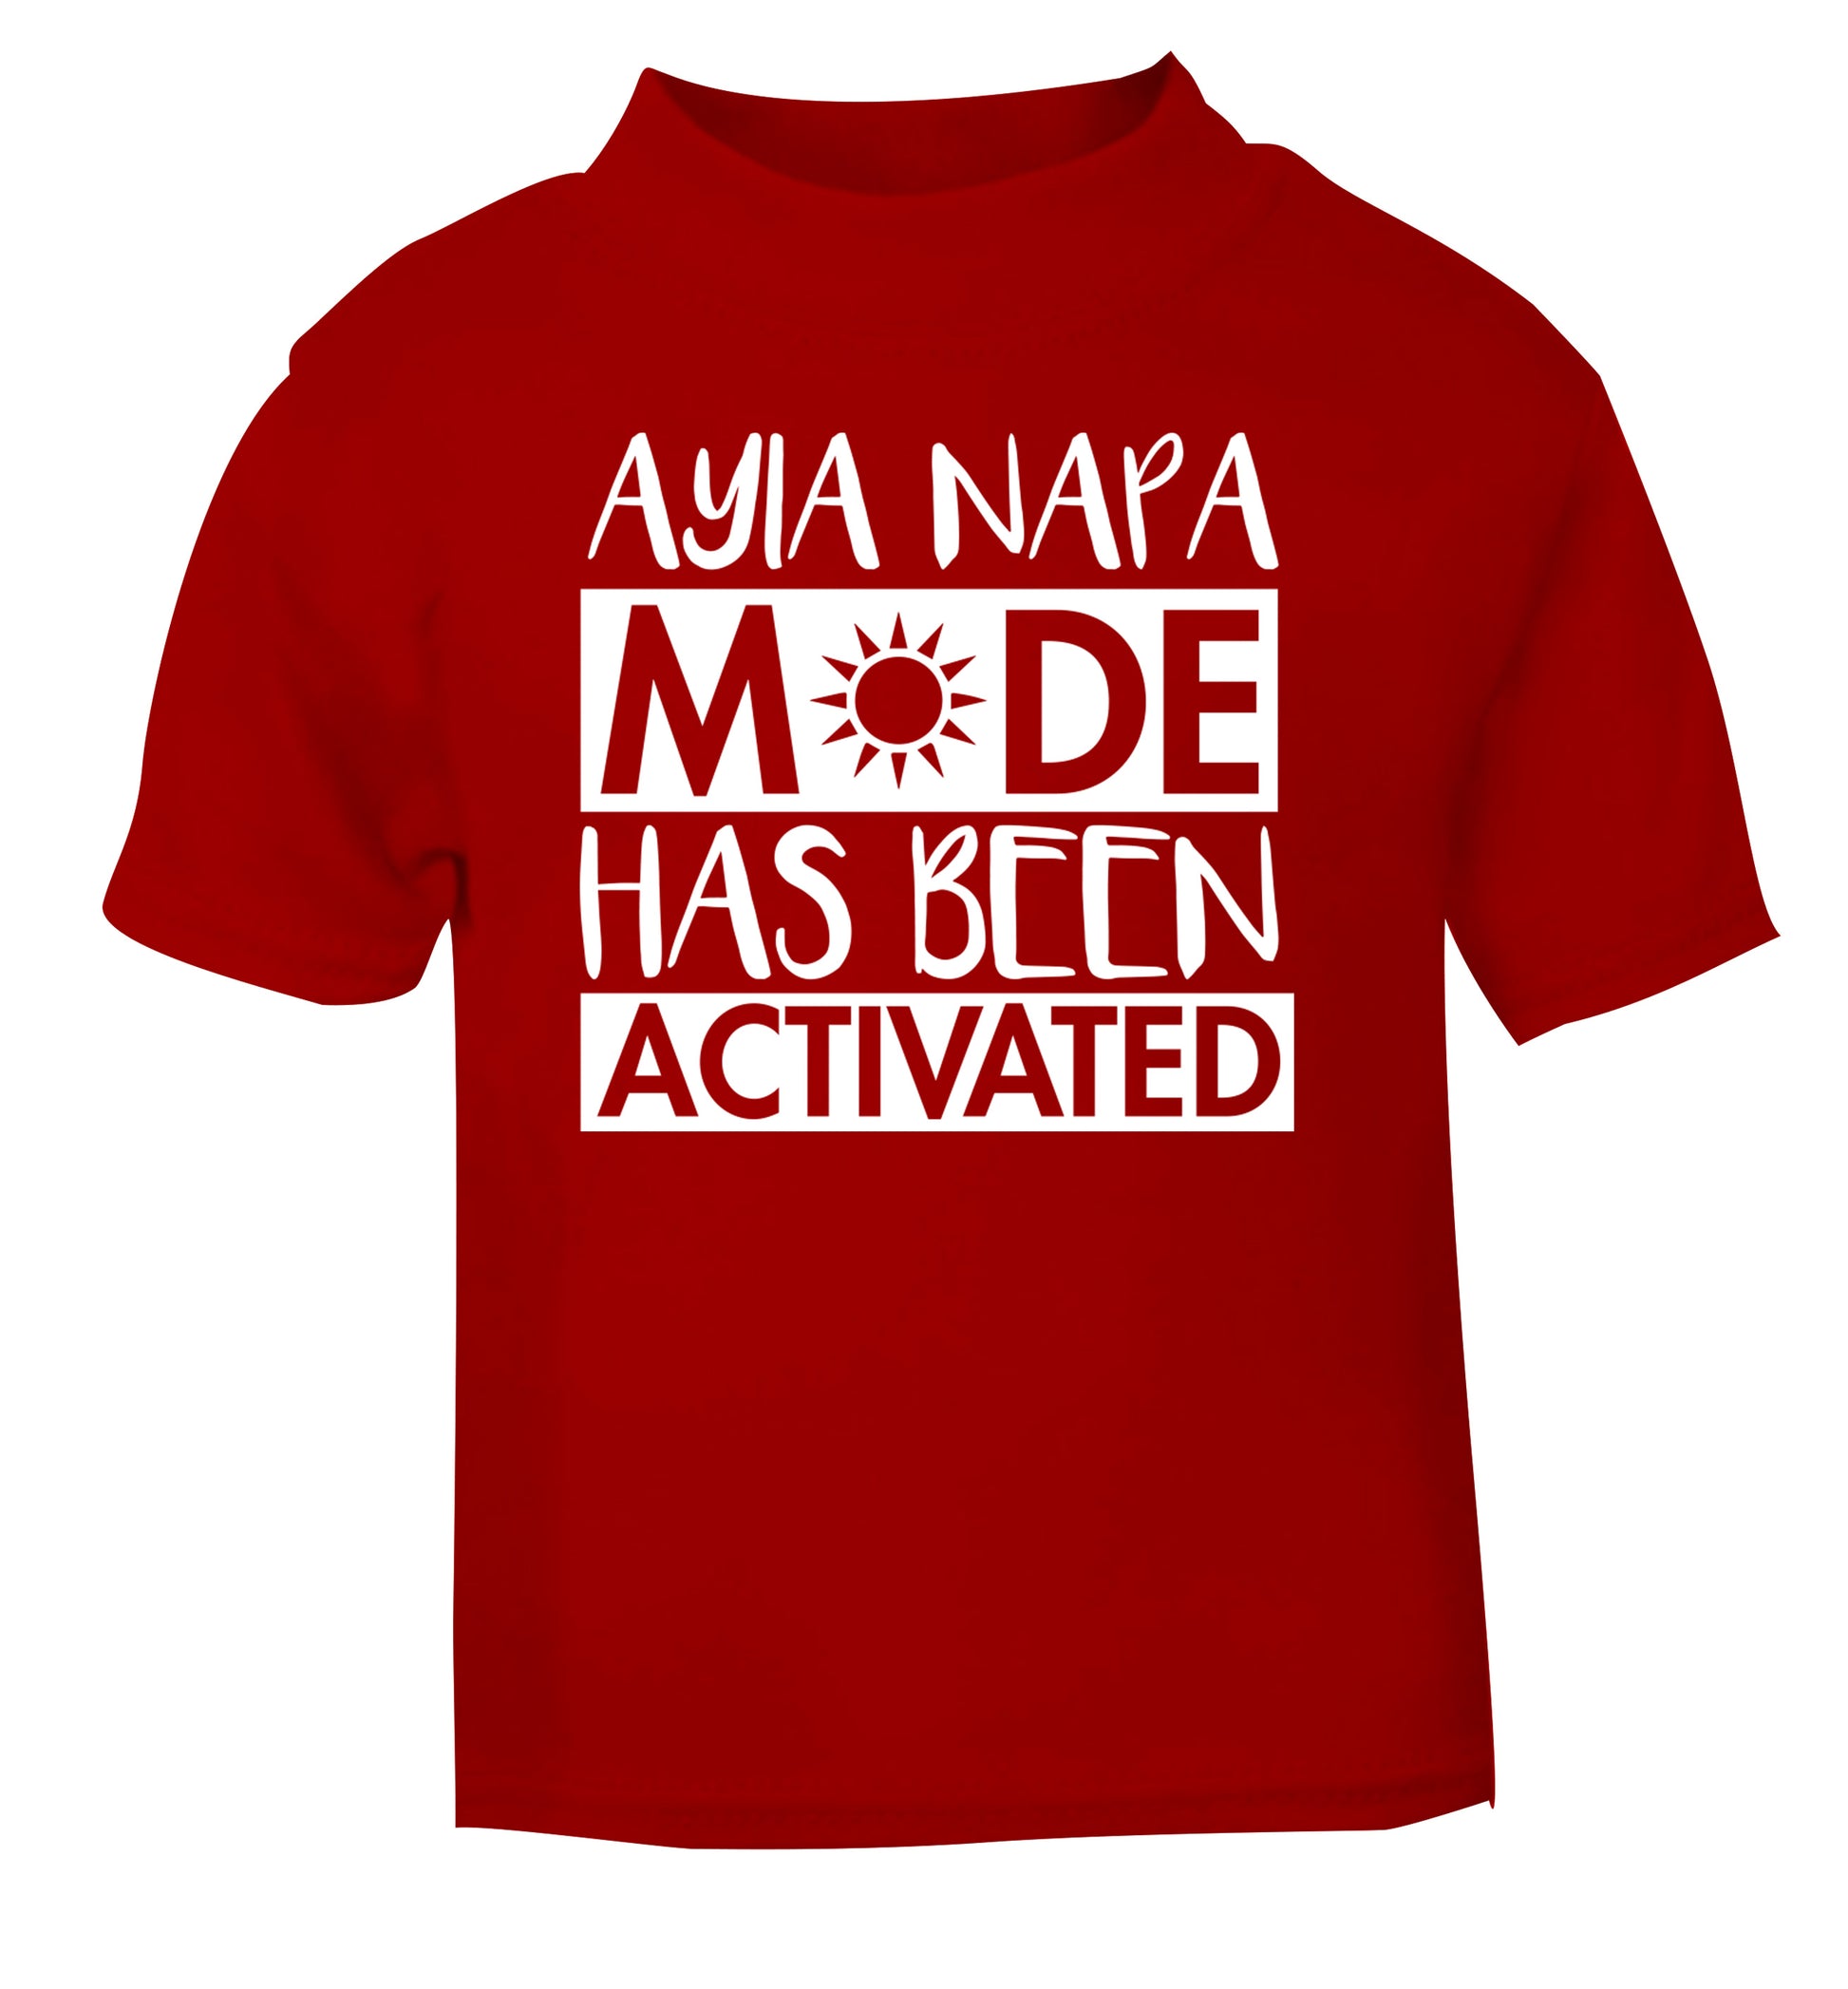 Ayia Napa mode has been activated red Baby Toddler Tshirt 2 Years